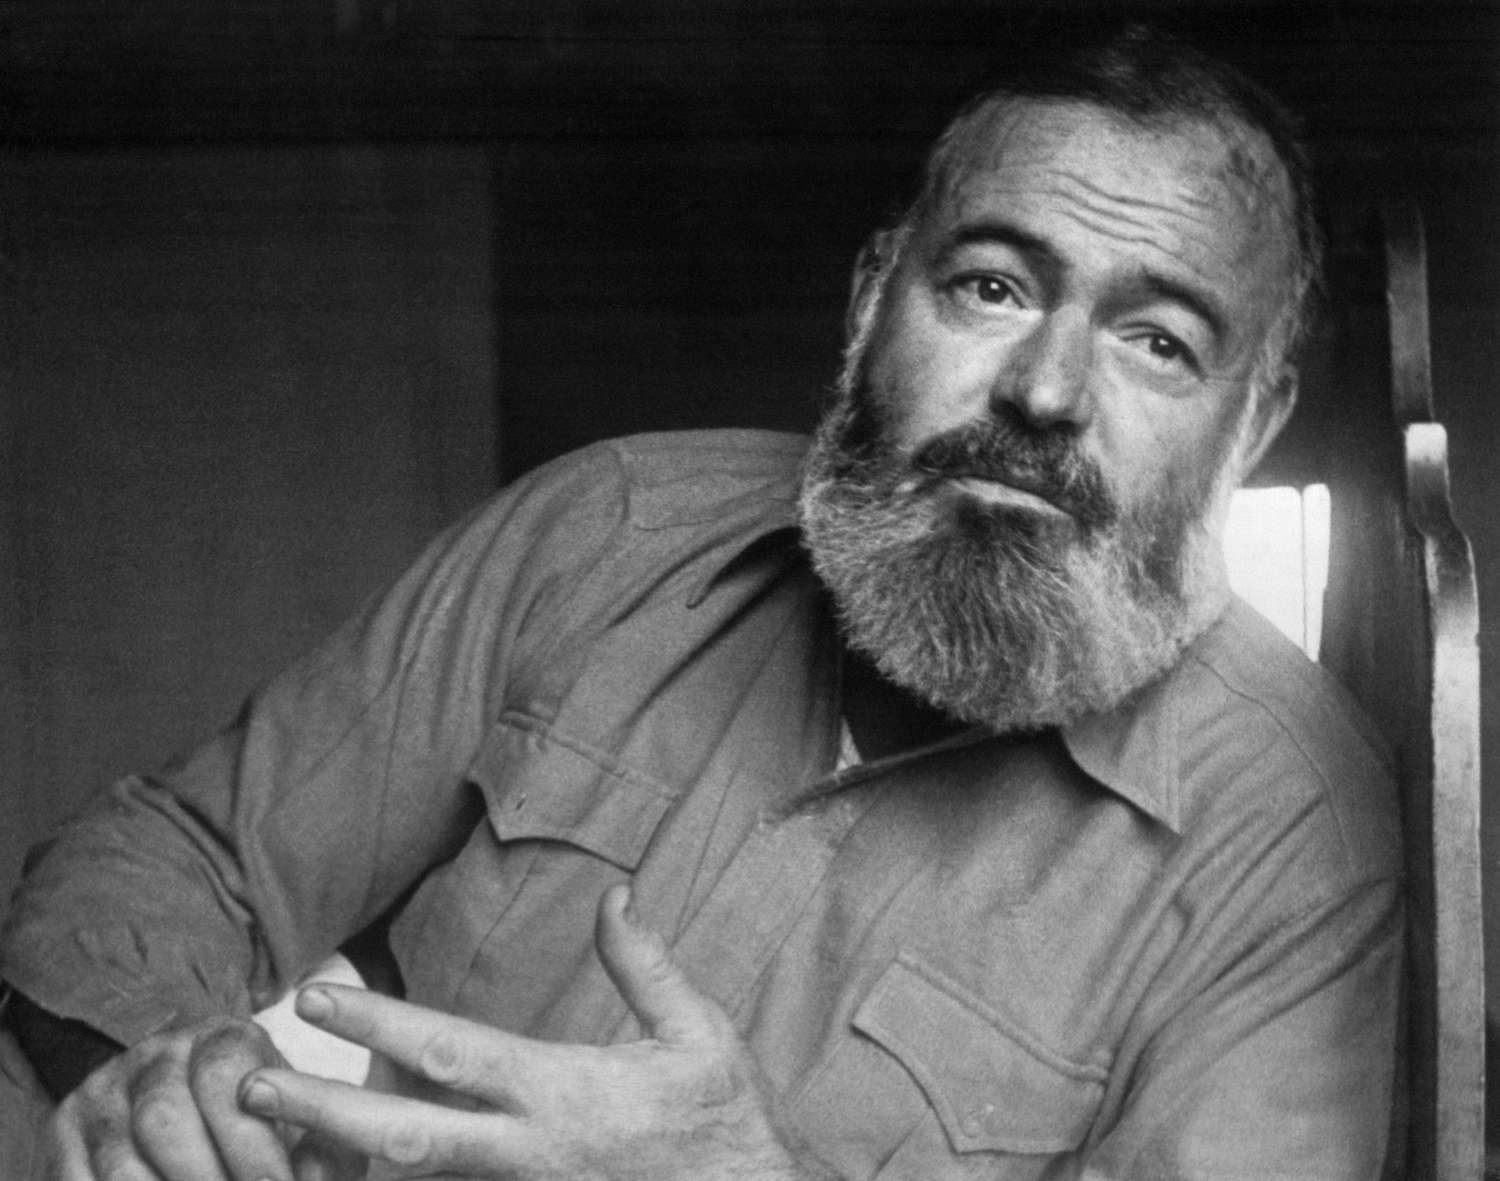 Ernest Hemingway faced controversies